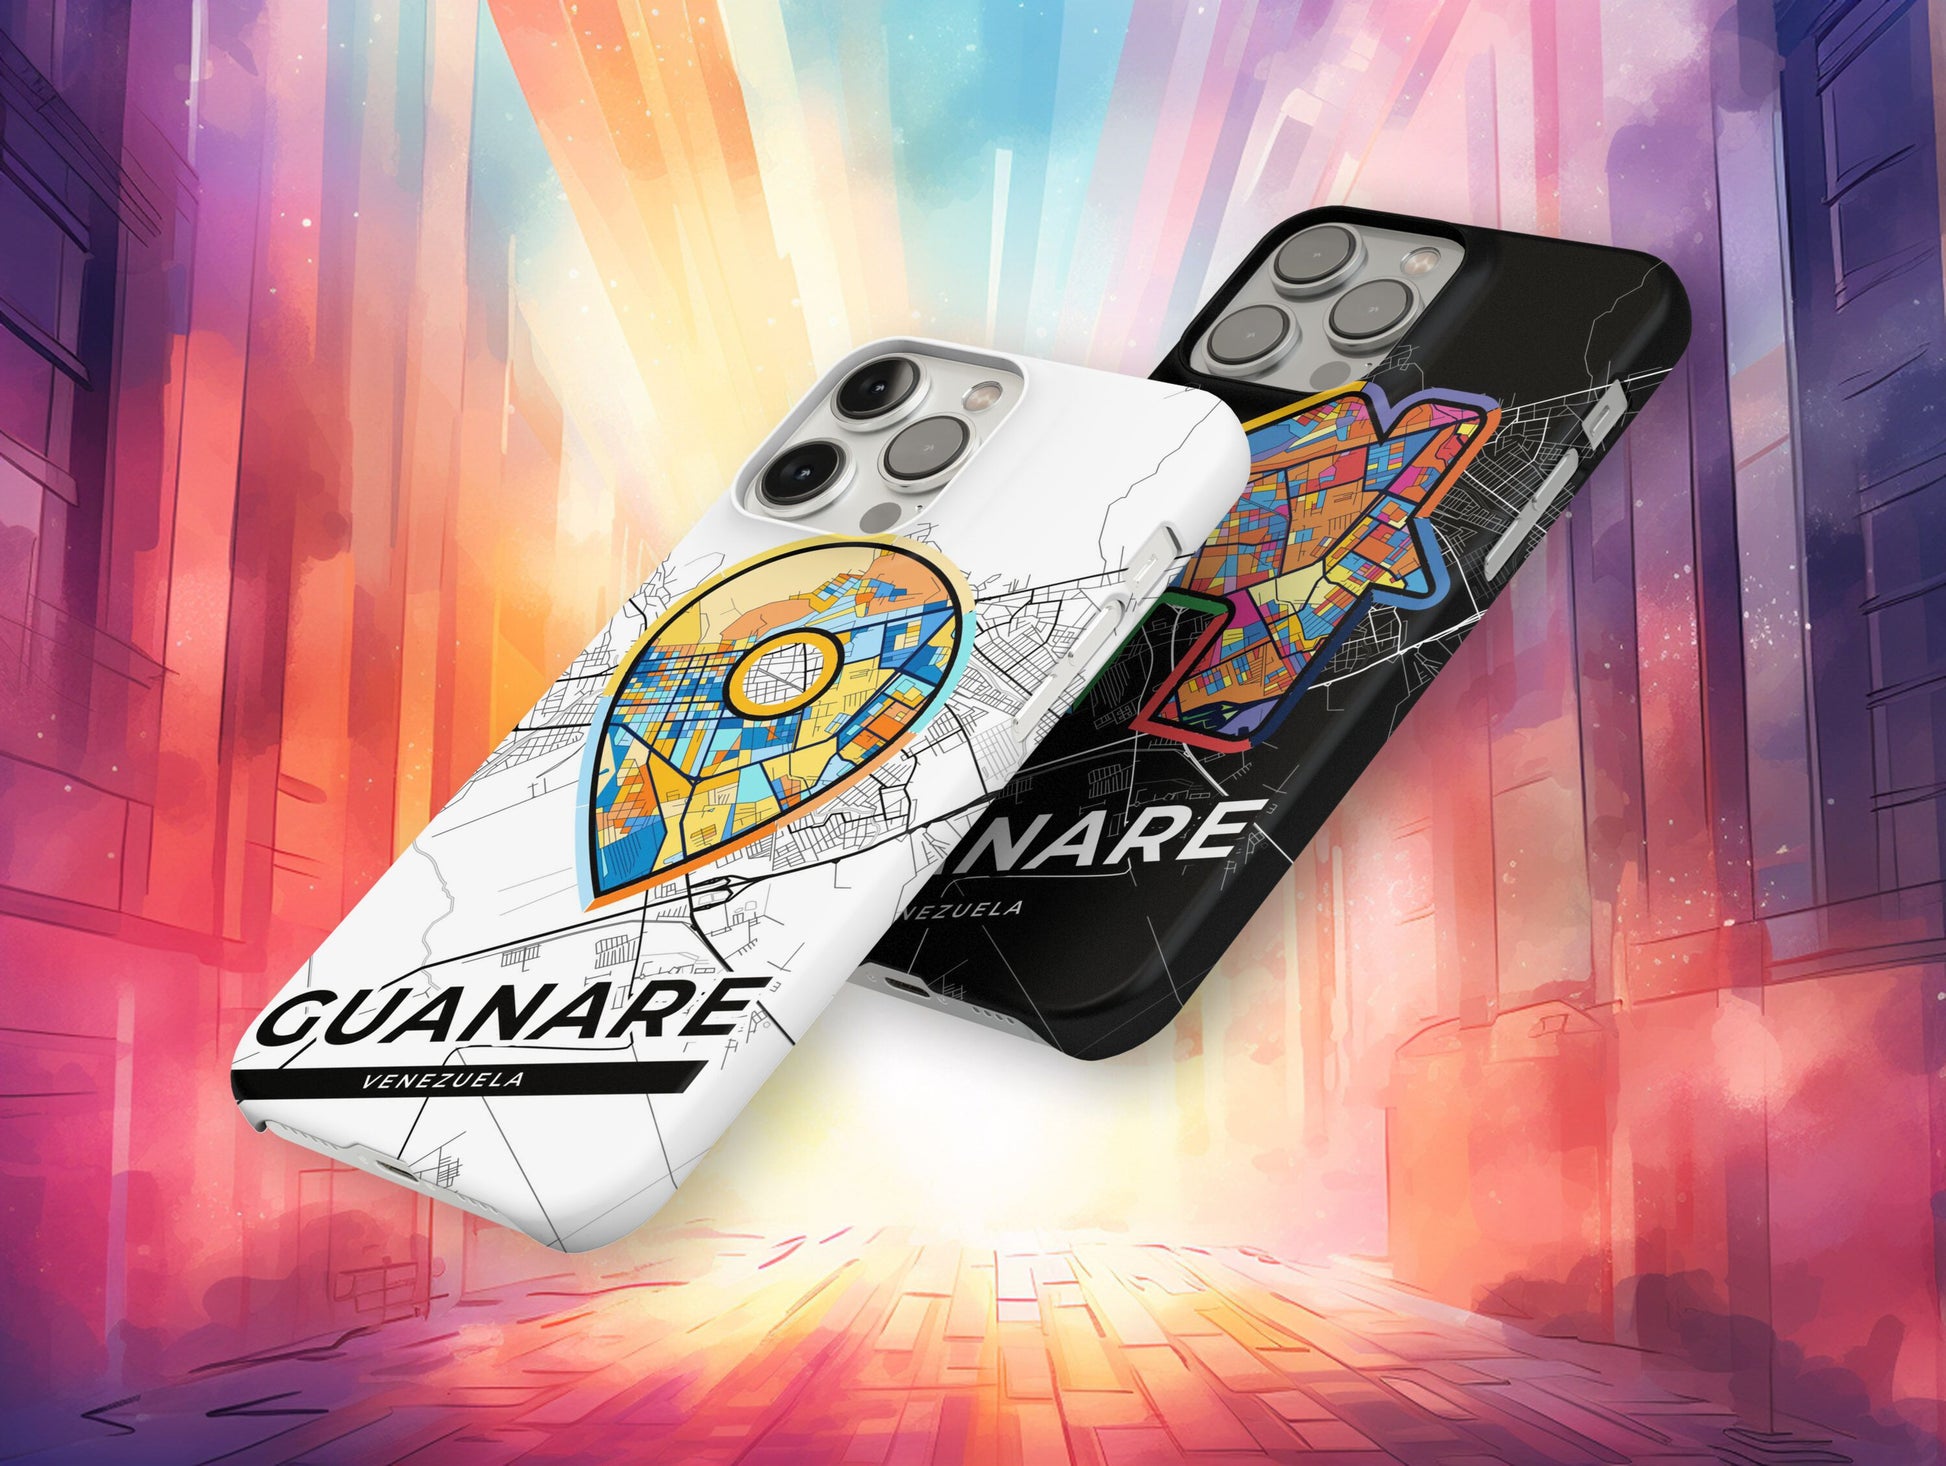 Guanare Venezuela slim phone case with colorful icon. Birthday, wedding or housewarming gift. Couple match cases.